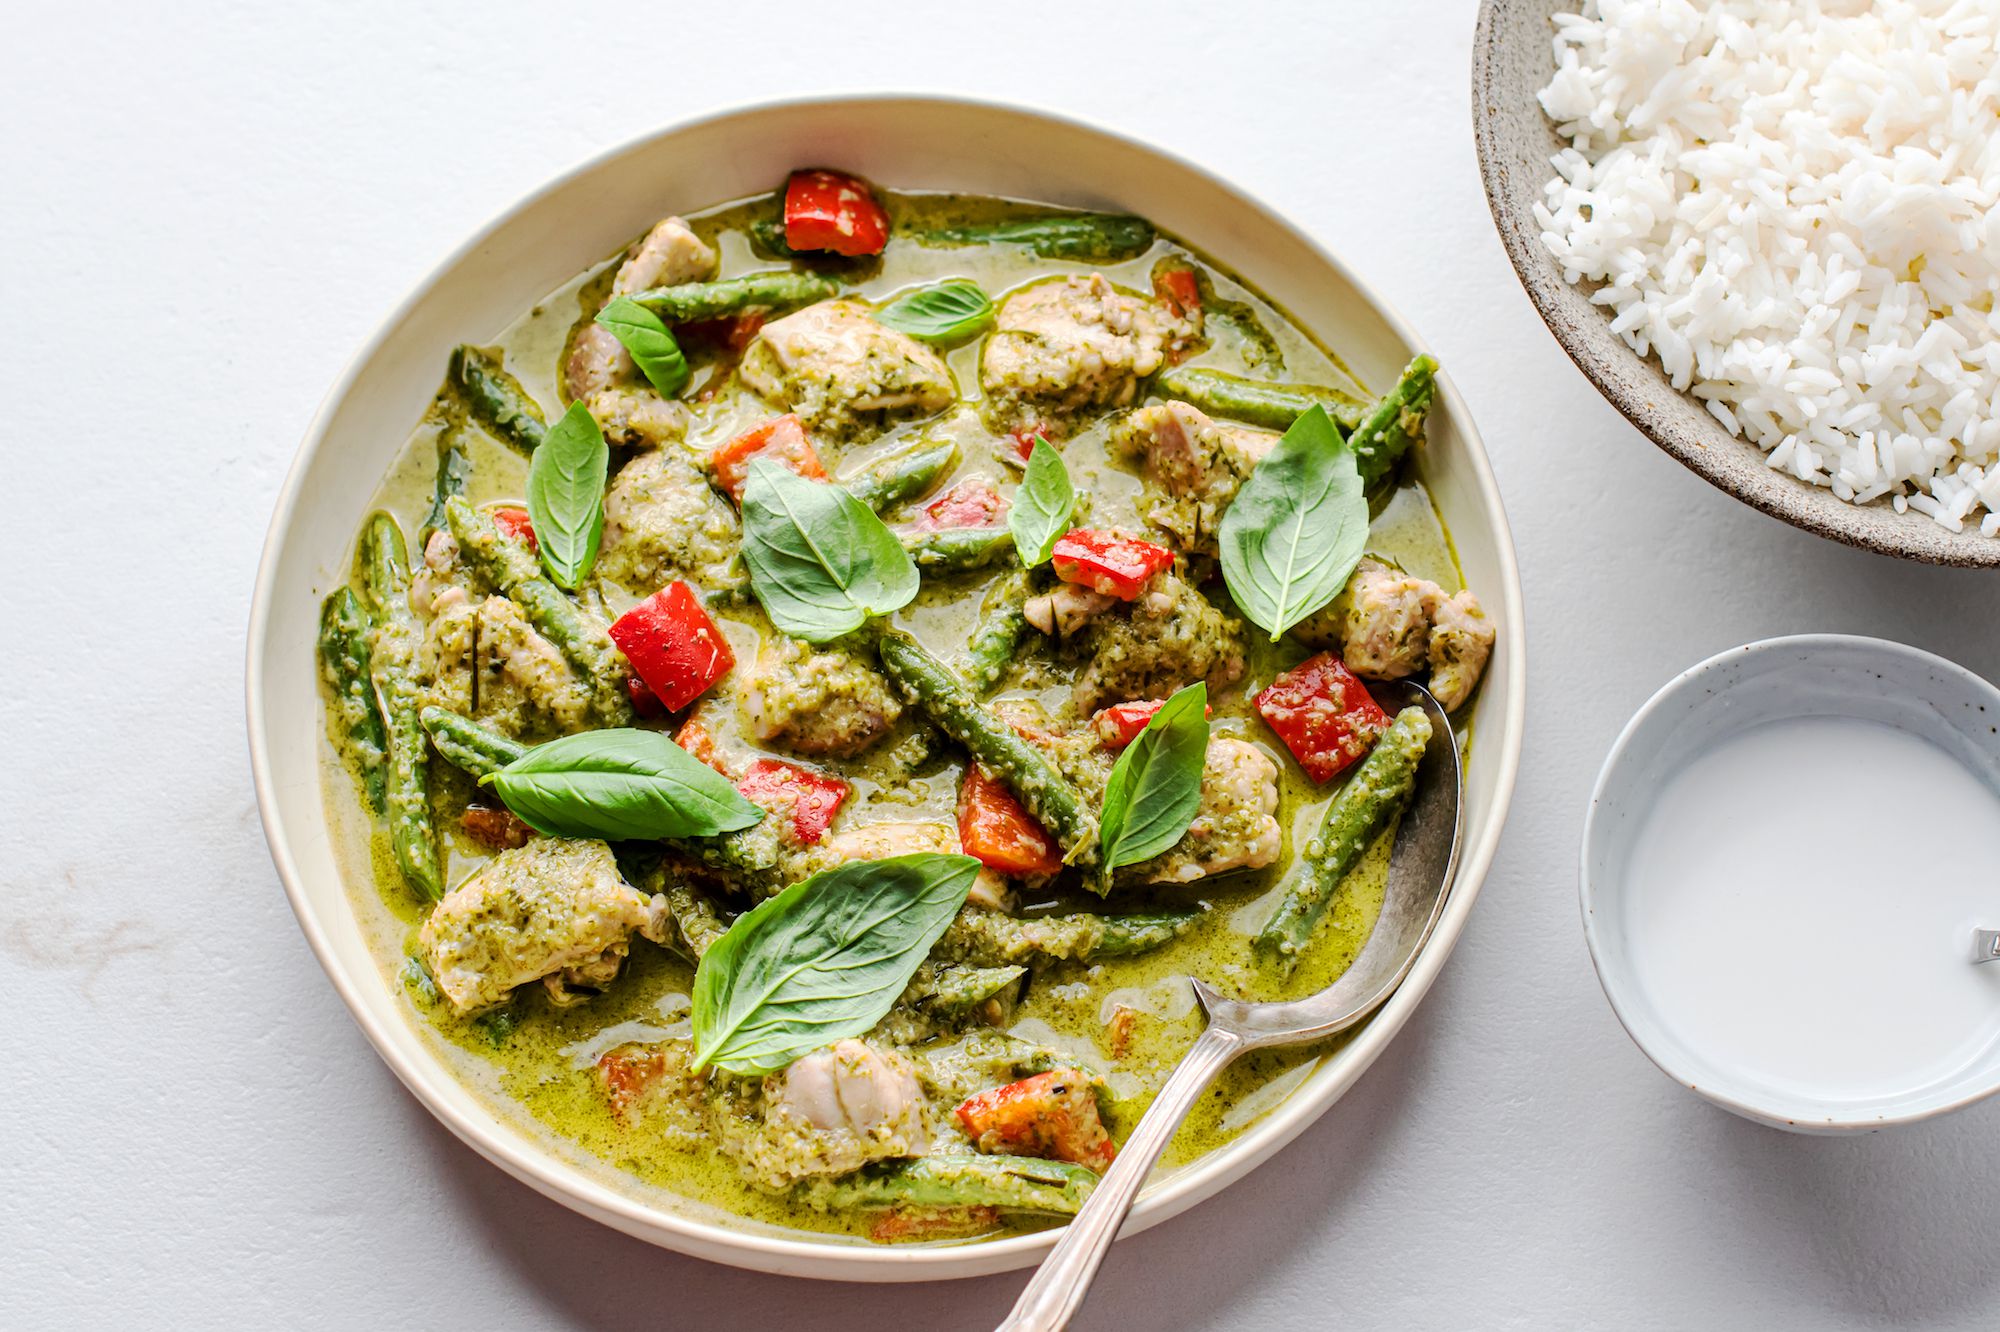 Get Your Thai Fix with this Healthy Vegetarian Green Curry